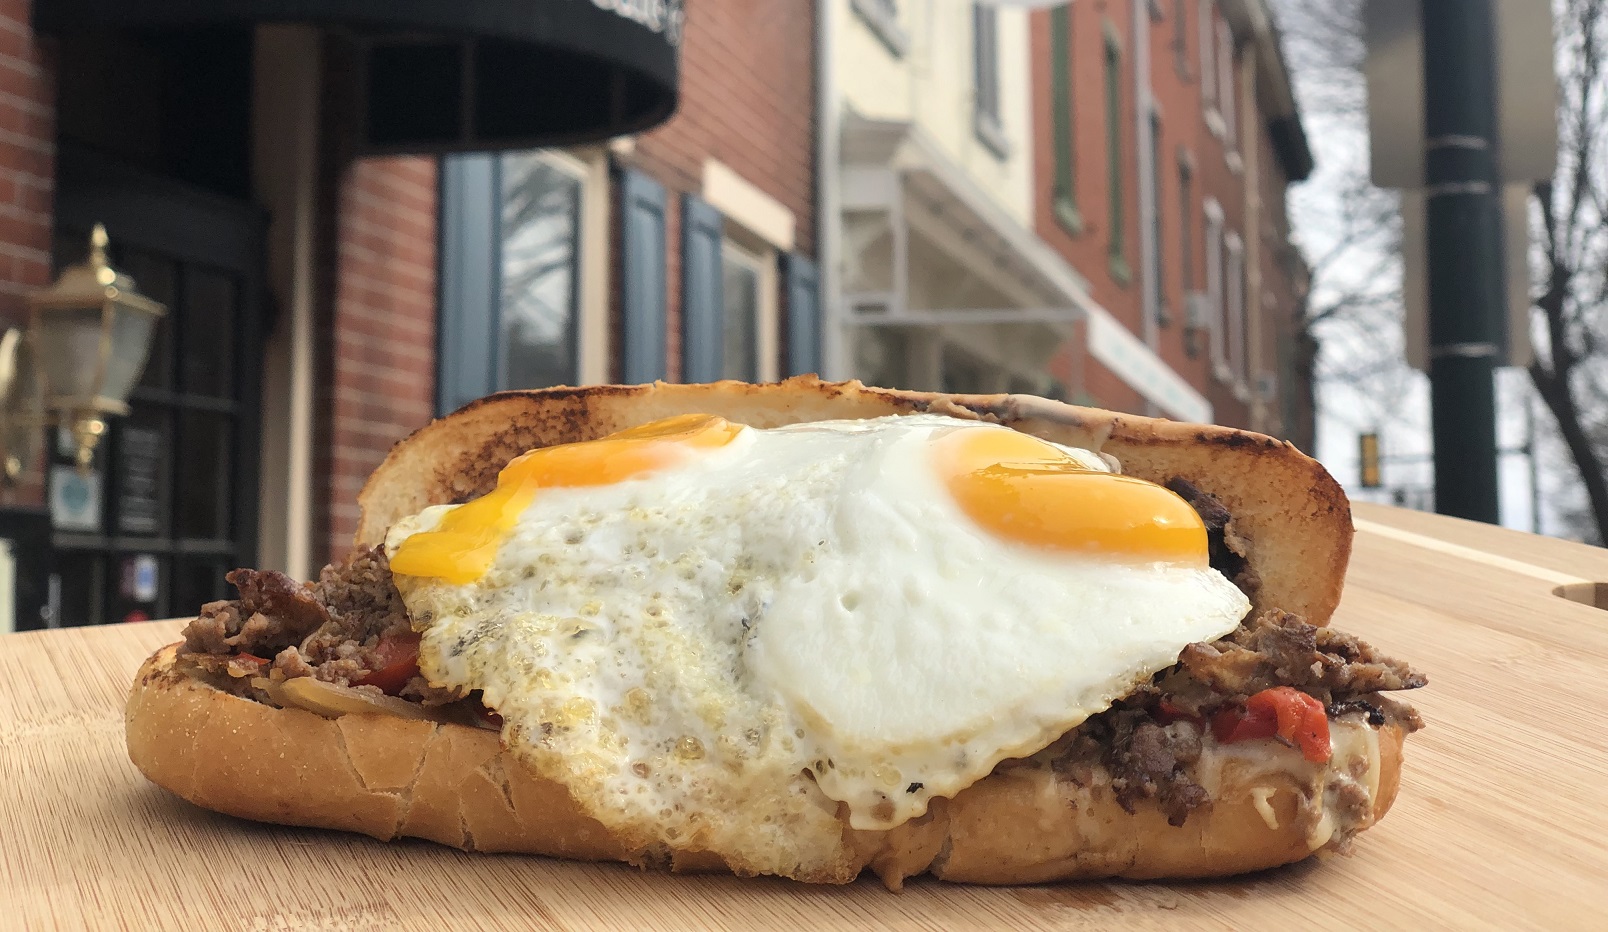 “The Antidote,” is a CBD-infused cheesesteak that’s topped with two farm-fresh eggs, which Hearn refers to as “the ultimate hangover cure,” and will be a first for Harrisburg gourmands.